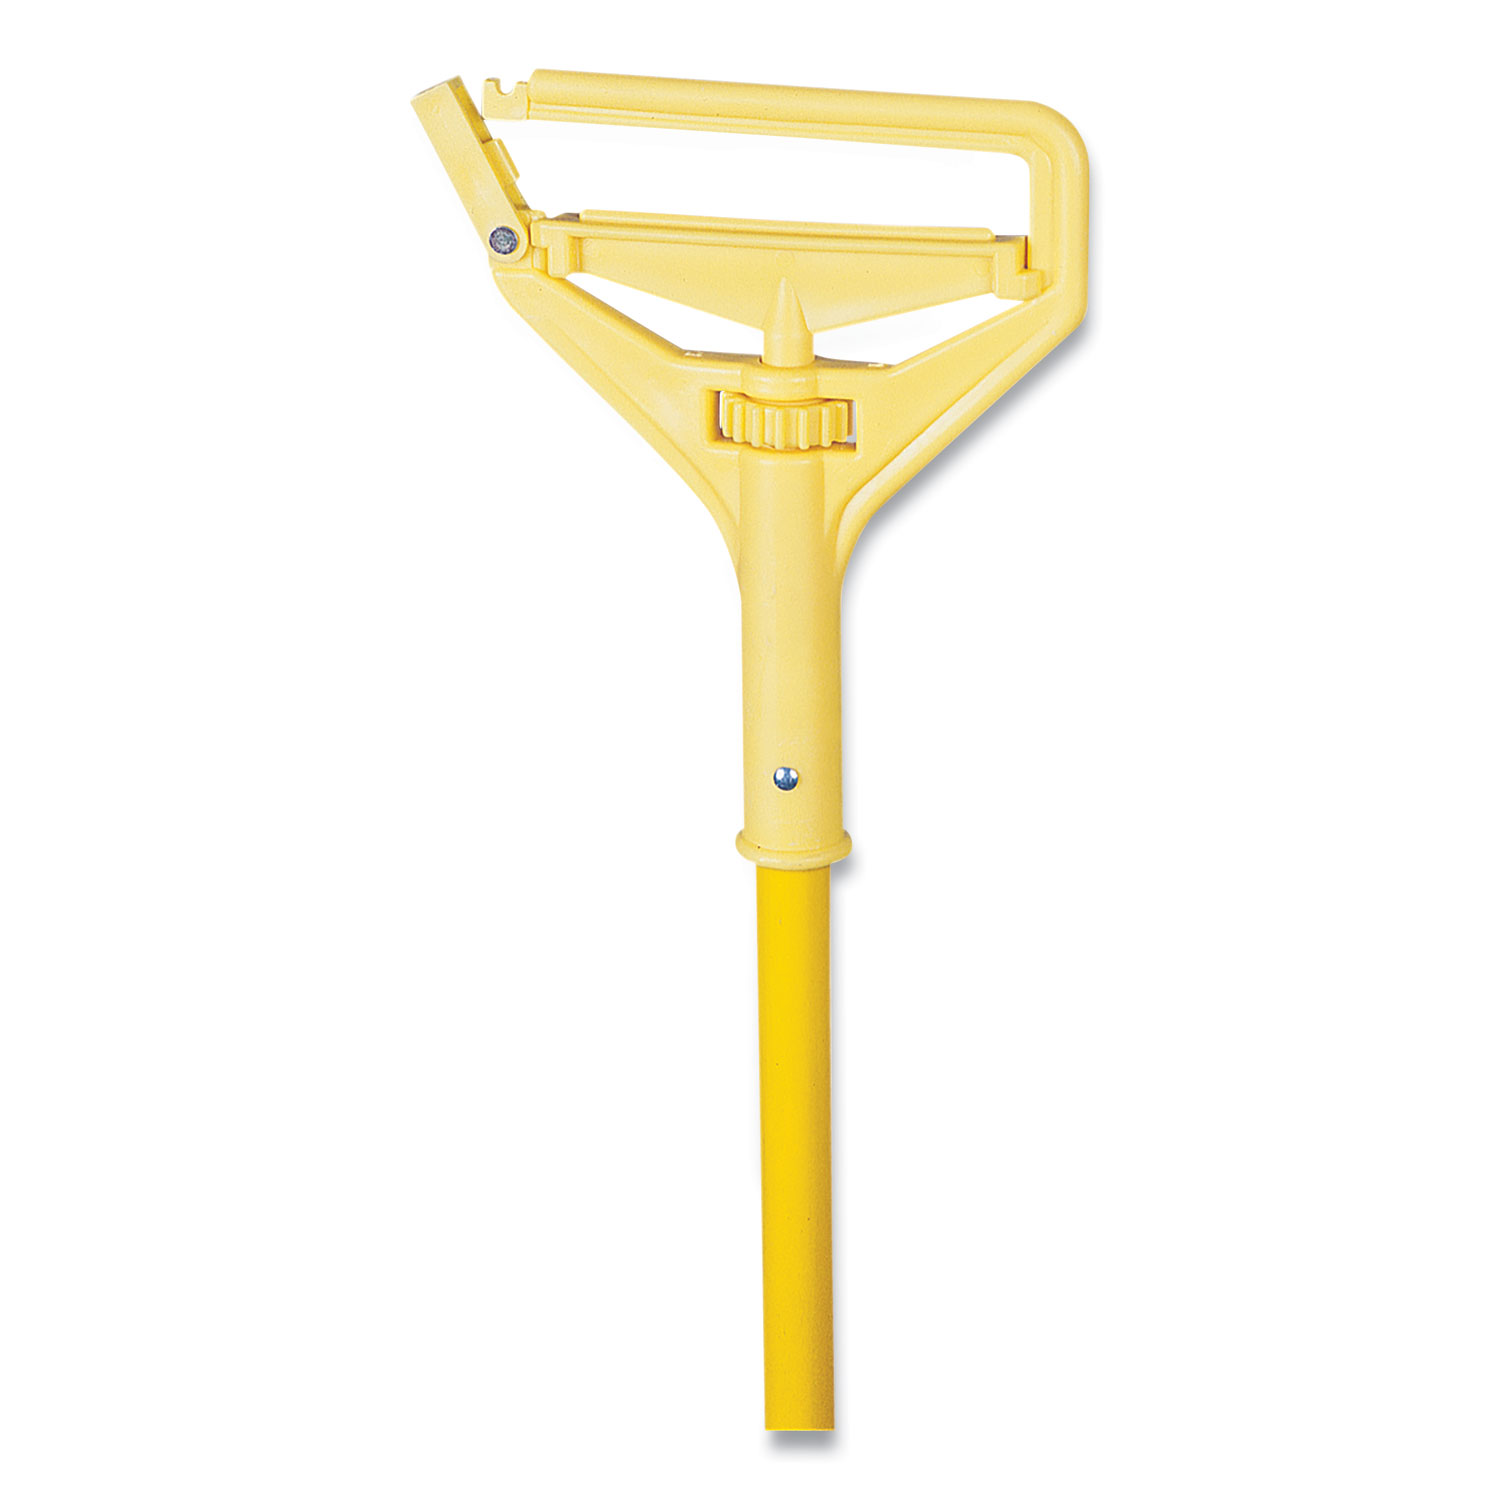  O'Dell C-8PM60/UNS620 Quick Change Mop Handle. 60, Plastic, Yellow (ODC899291) 